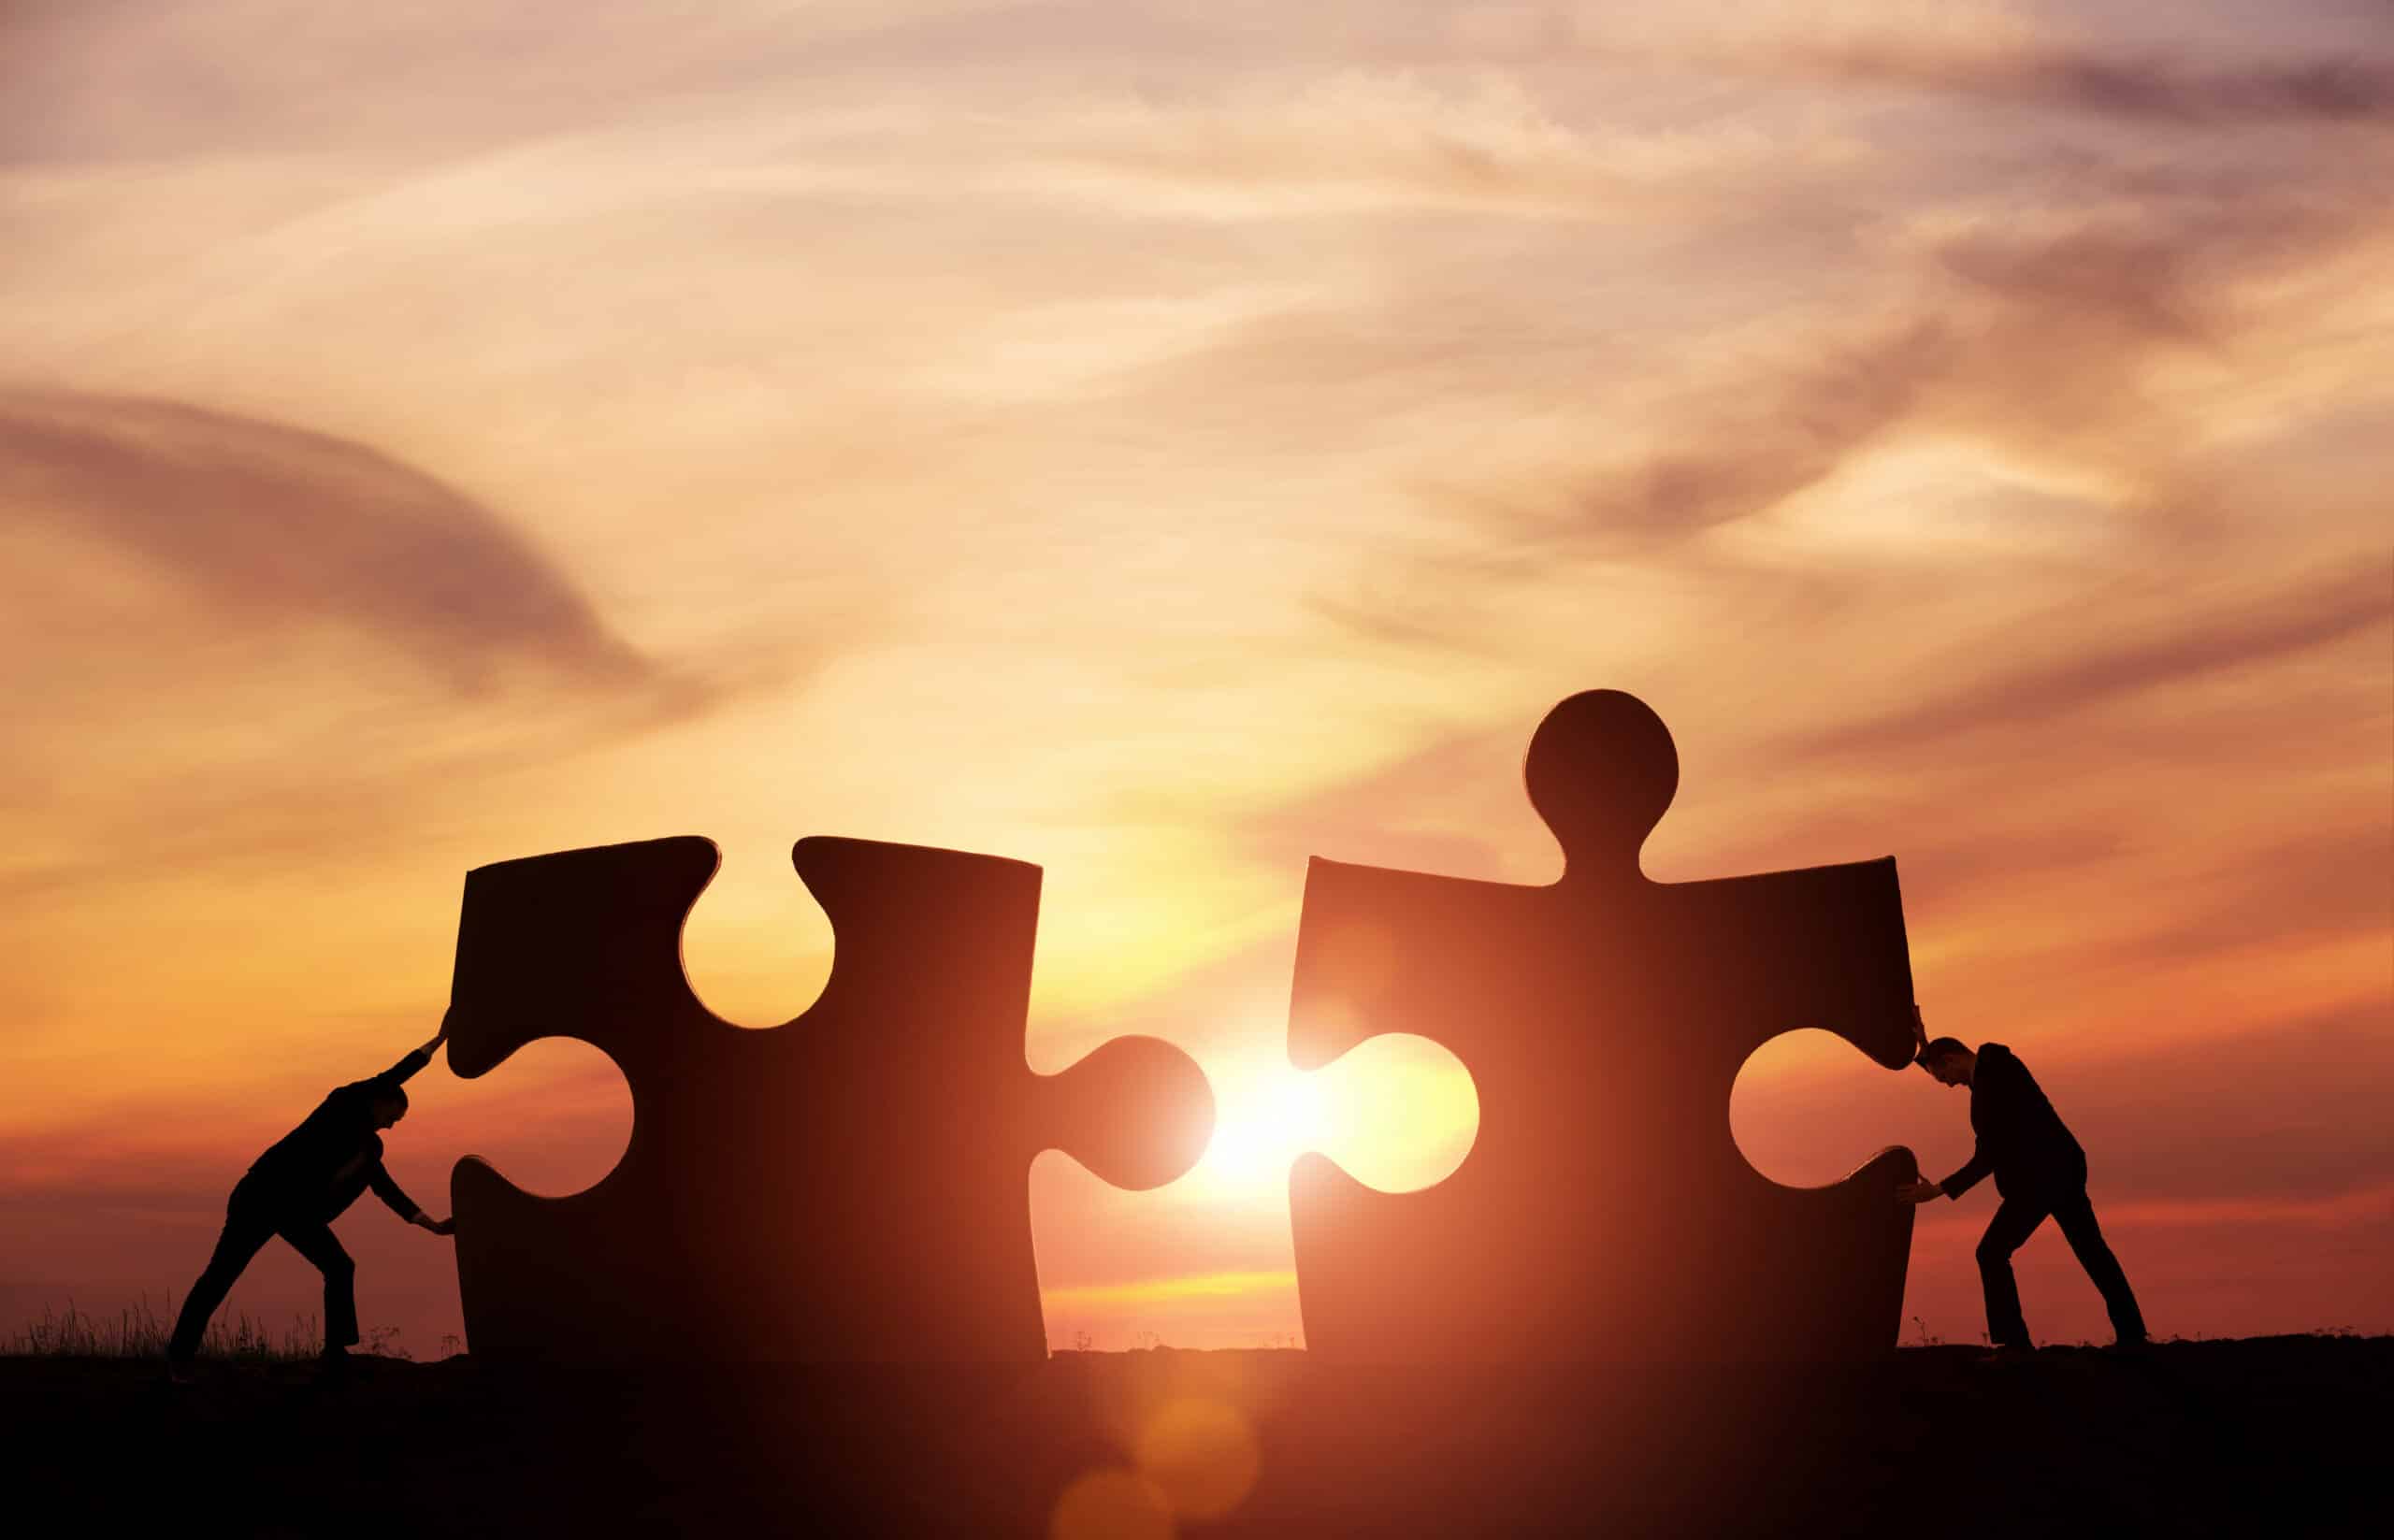 An image of two men pushing together two large puzzle pieces. The sun is setting in the background and the overall image has a dark orange hue.